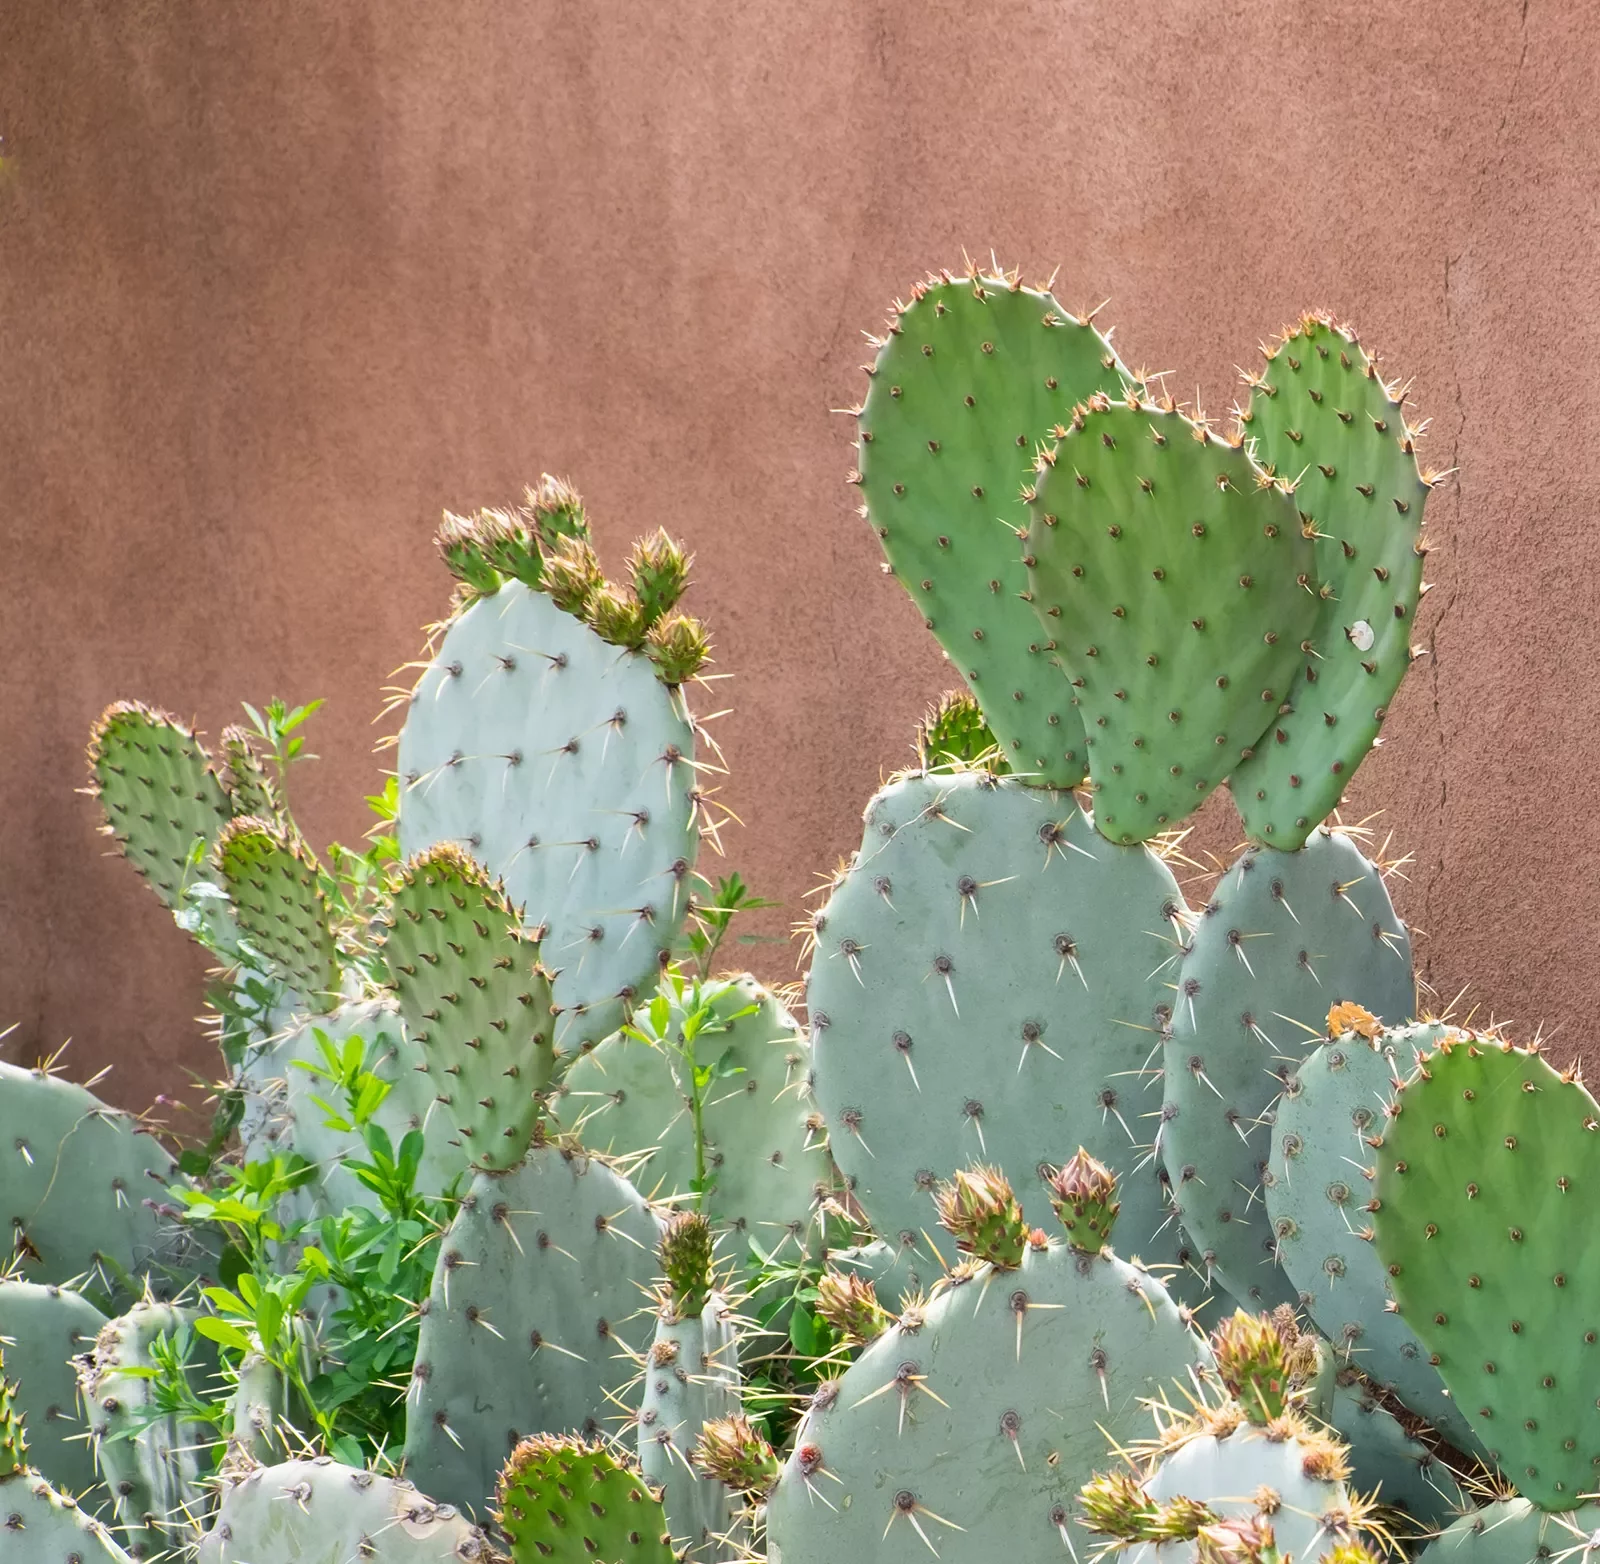 Cacti against clay wall